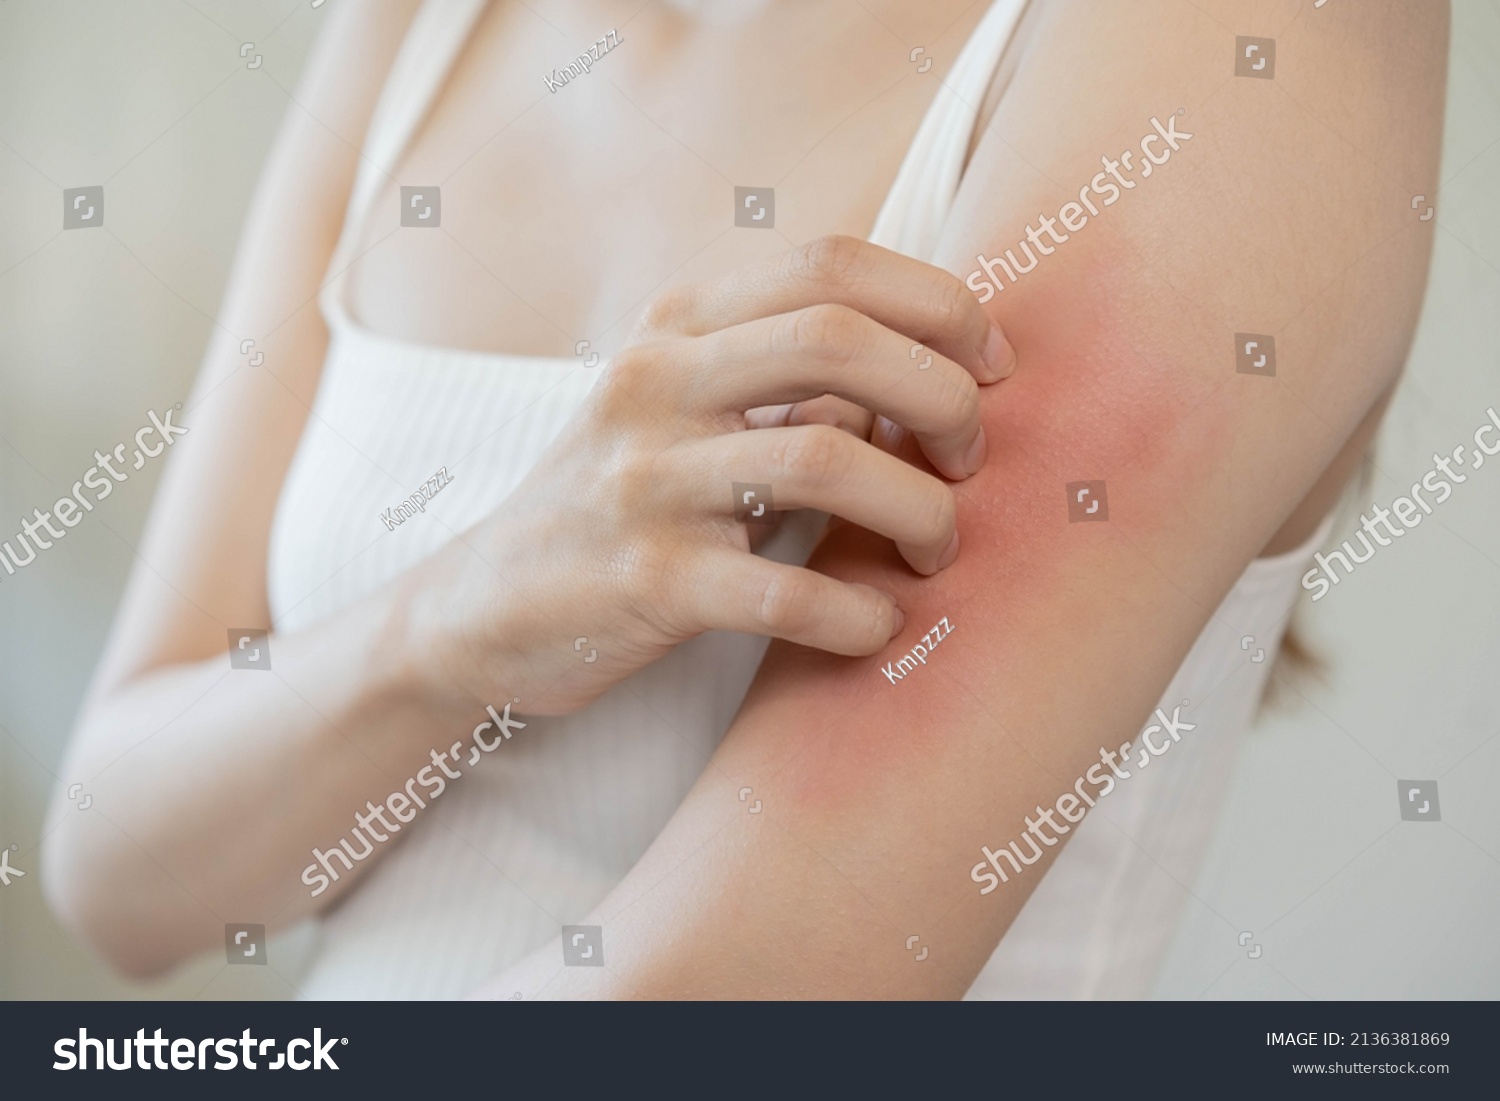 Dermatology, asian young woman, girl allergy, allergic reaction from atopic, insect bites on her arm, hand in scratching itchy, itch red spot or rash of skin. Healthcare, treatment of beauty. #2136381869